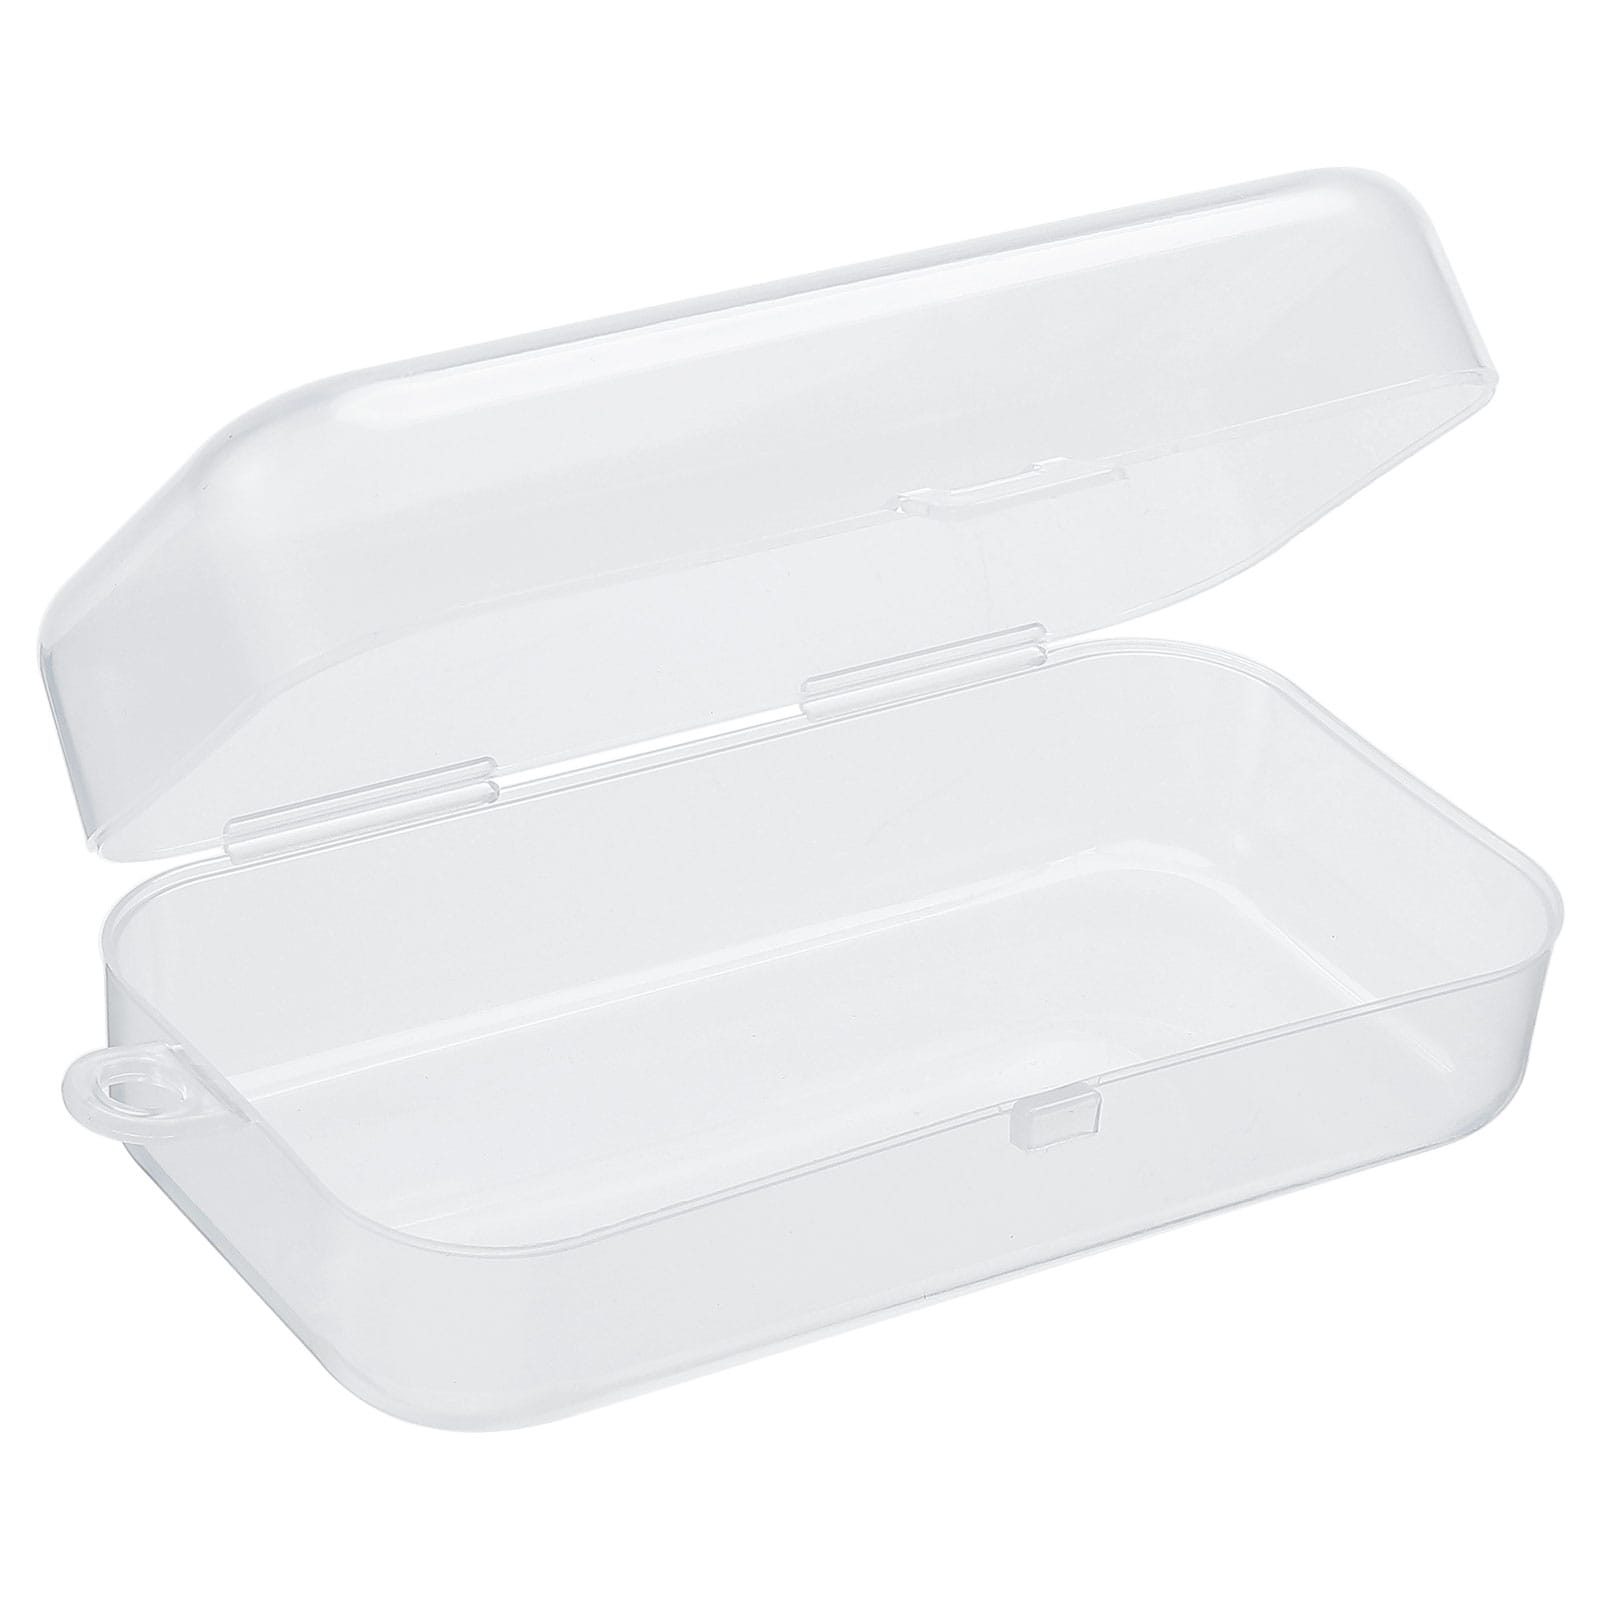 https://ak1.ostkcdn.com/images/products/is/images/direct/6f1a8d39f44980073e3b2093f7c0cbdcbd30038b/Storage-Containers-with-Hinged-Lid-Plastic-Rectangle-Box-for-Art-Craft.jpg